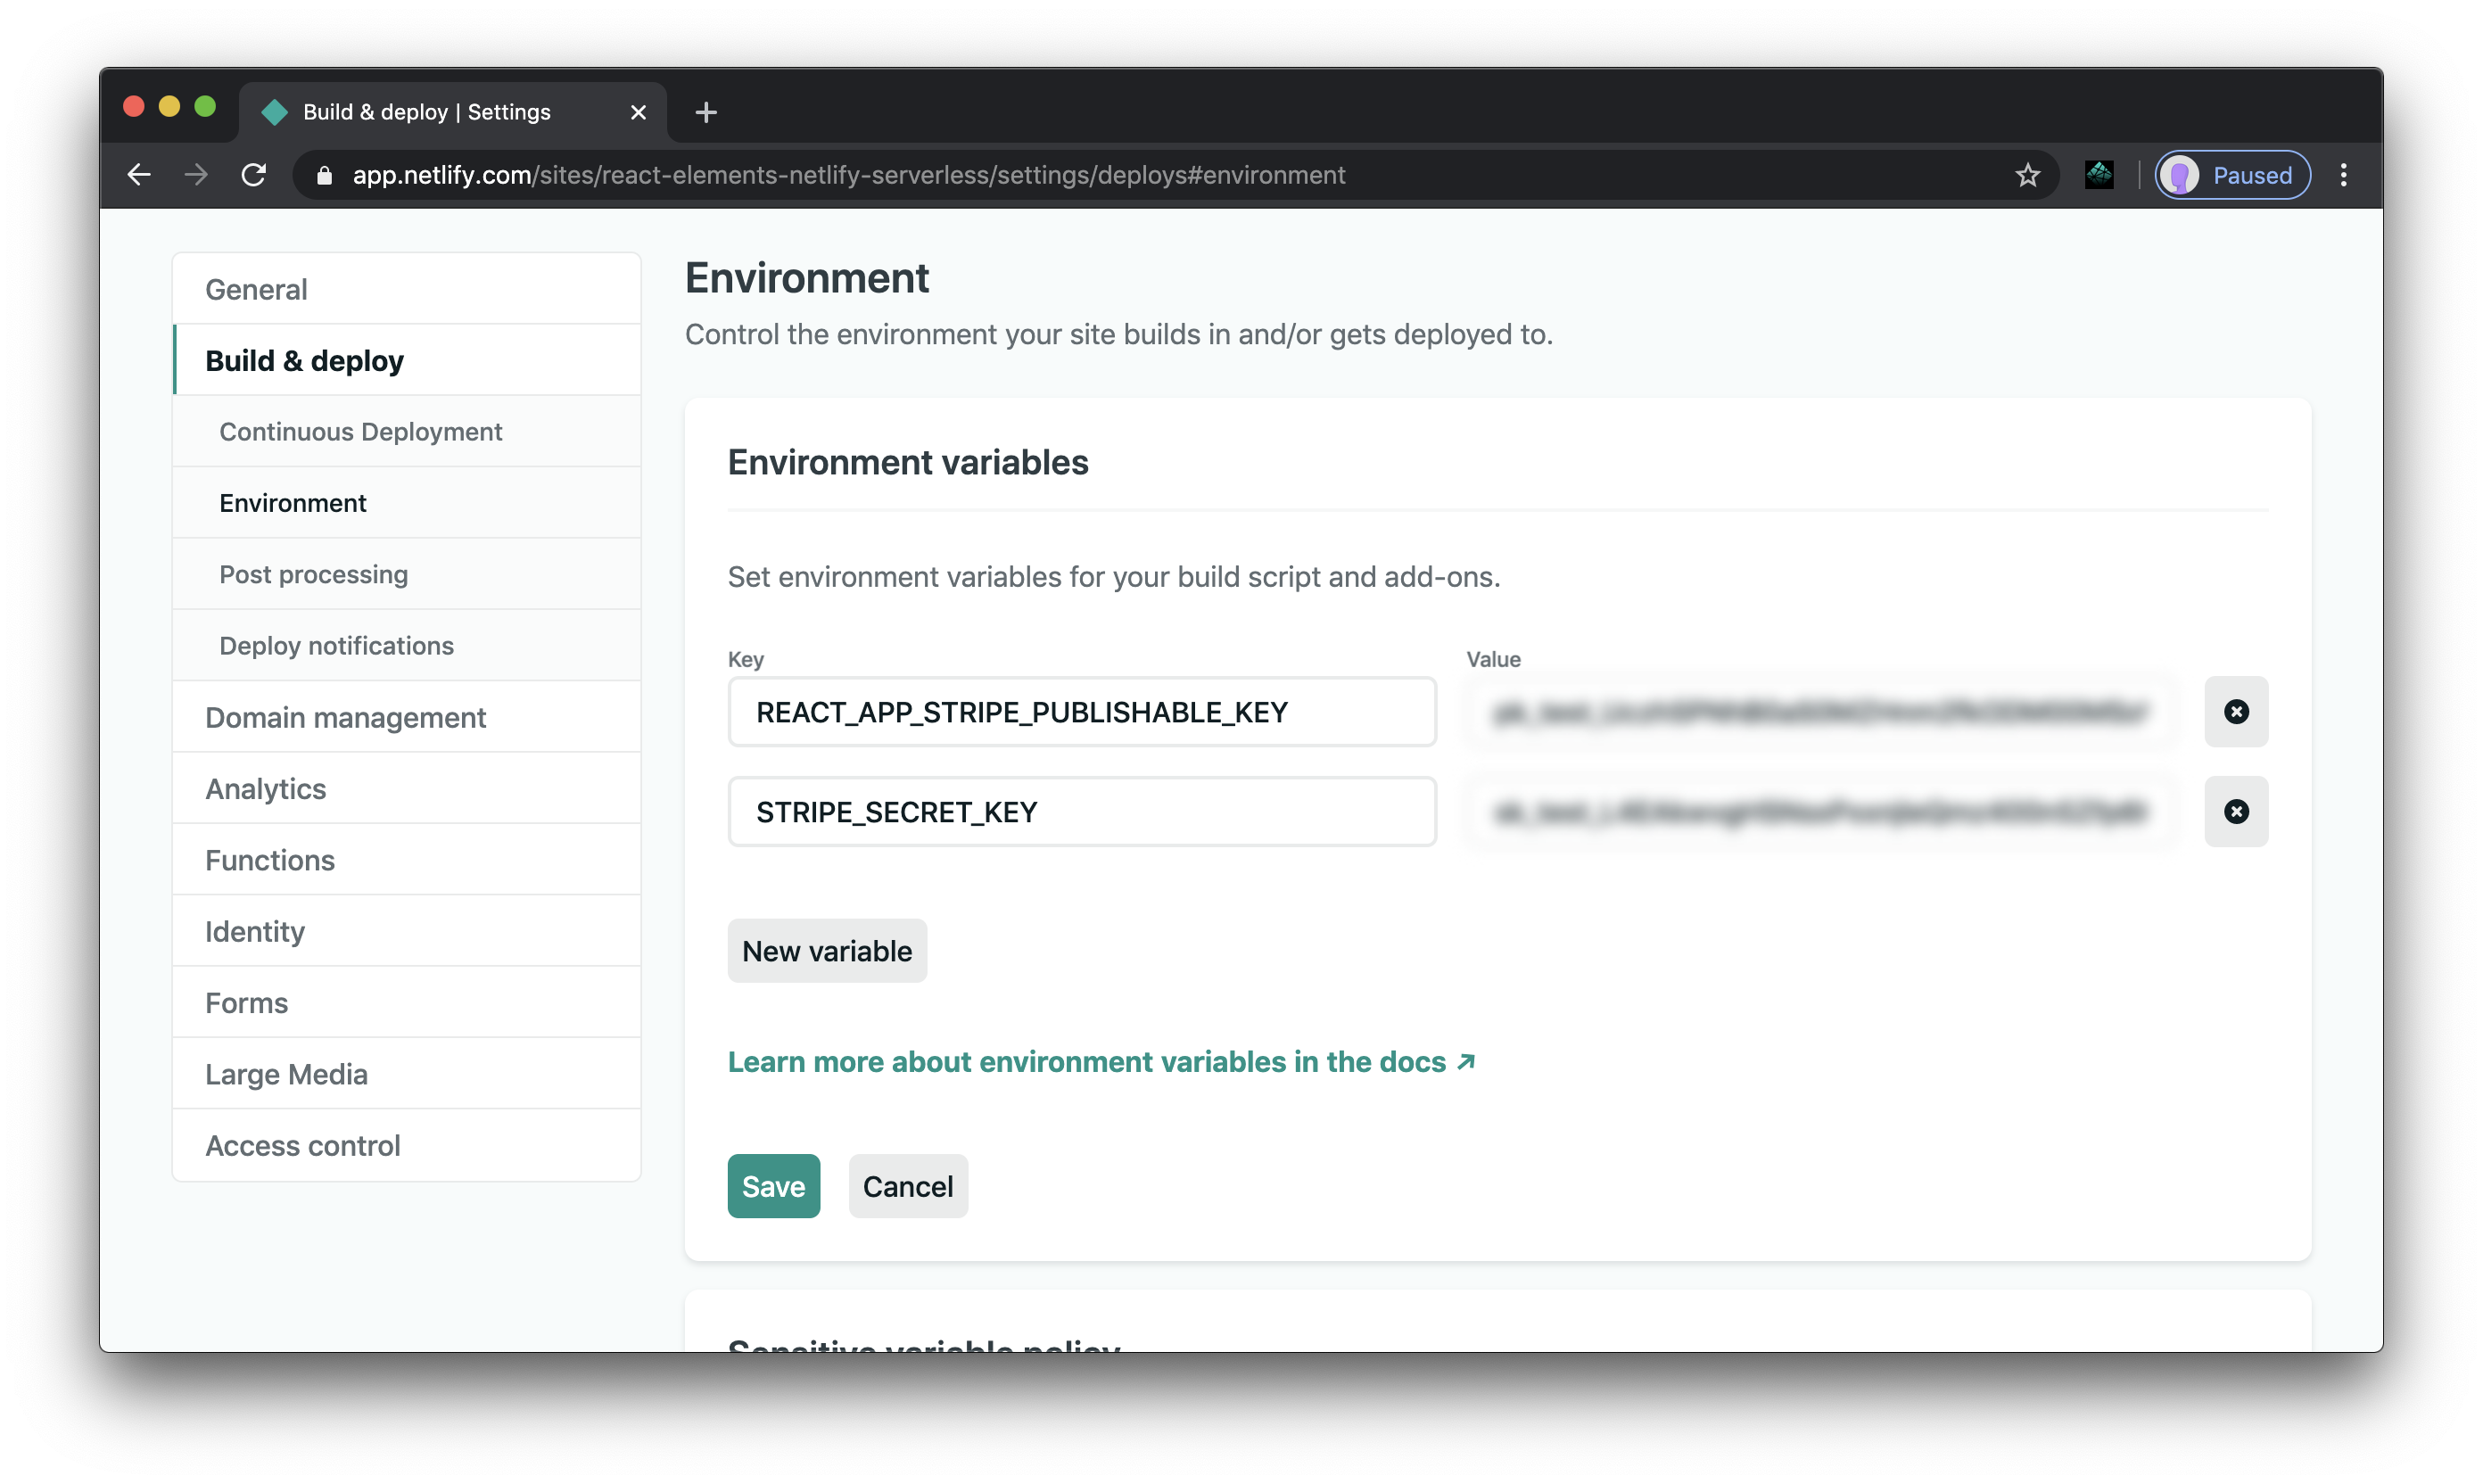 The environment variables section of your Netlify dashboard